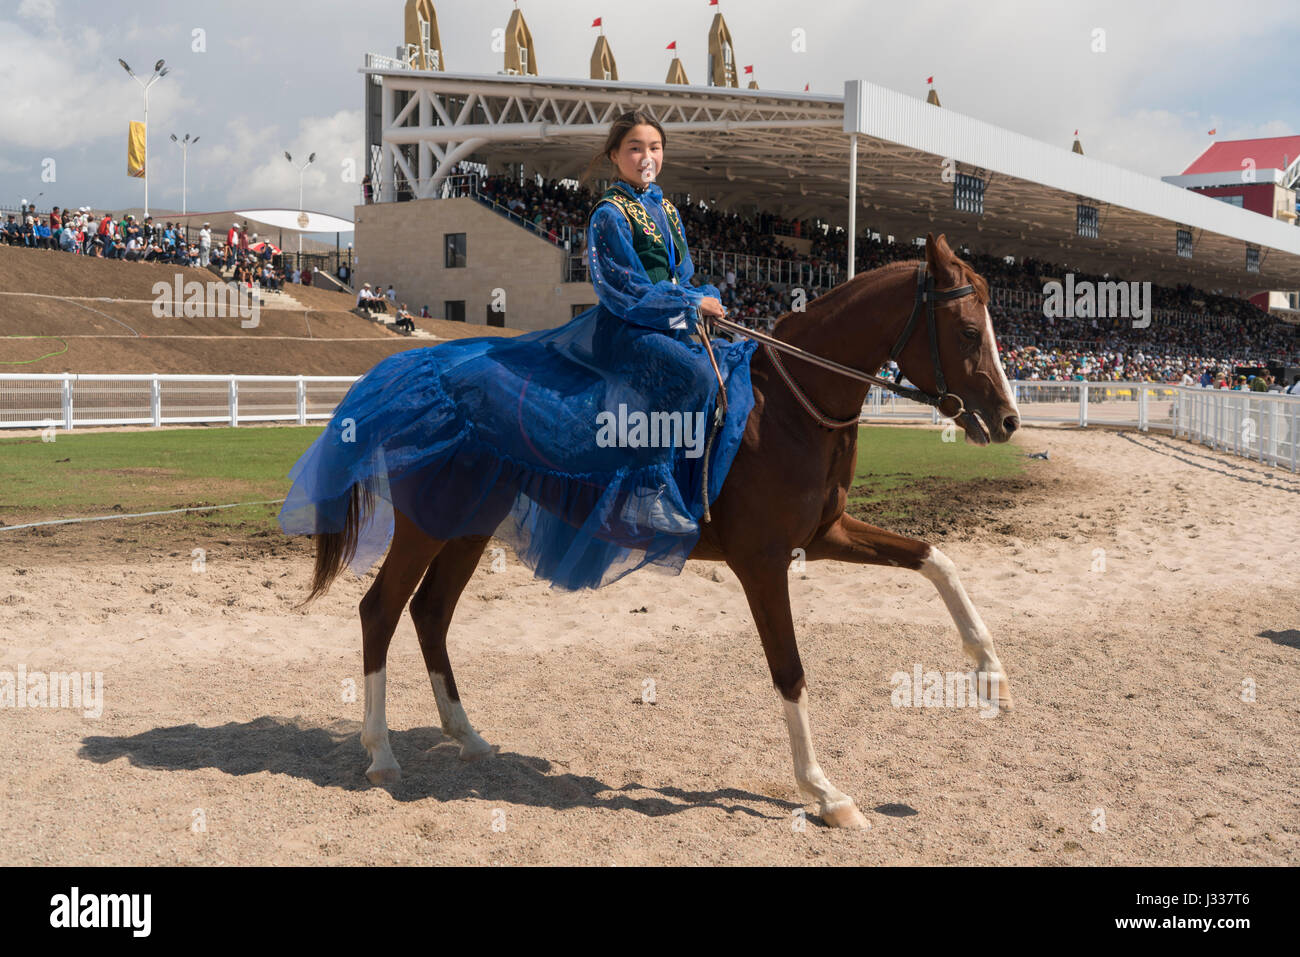 A Kyrgyz girl dressed in blue on a race horse at an horseracing event at the World Nomad Games 2016 in Cholpon Ata, Kyrgyzstan Stock Photo